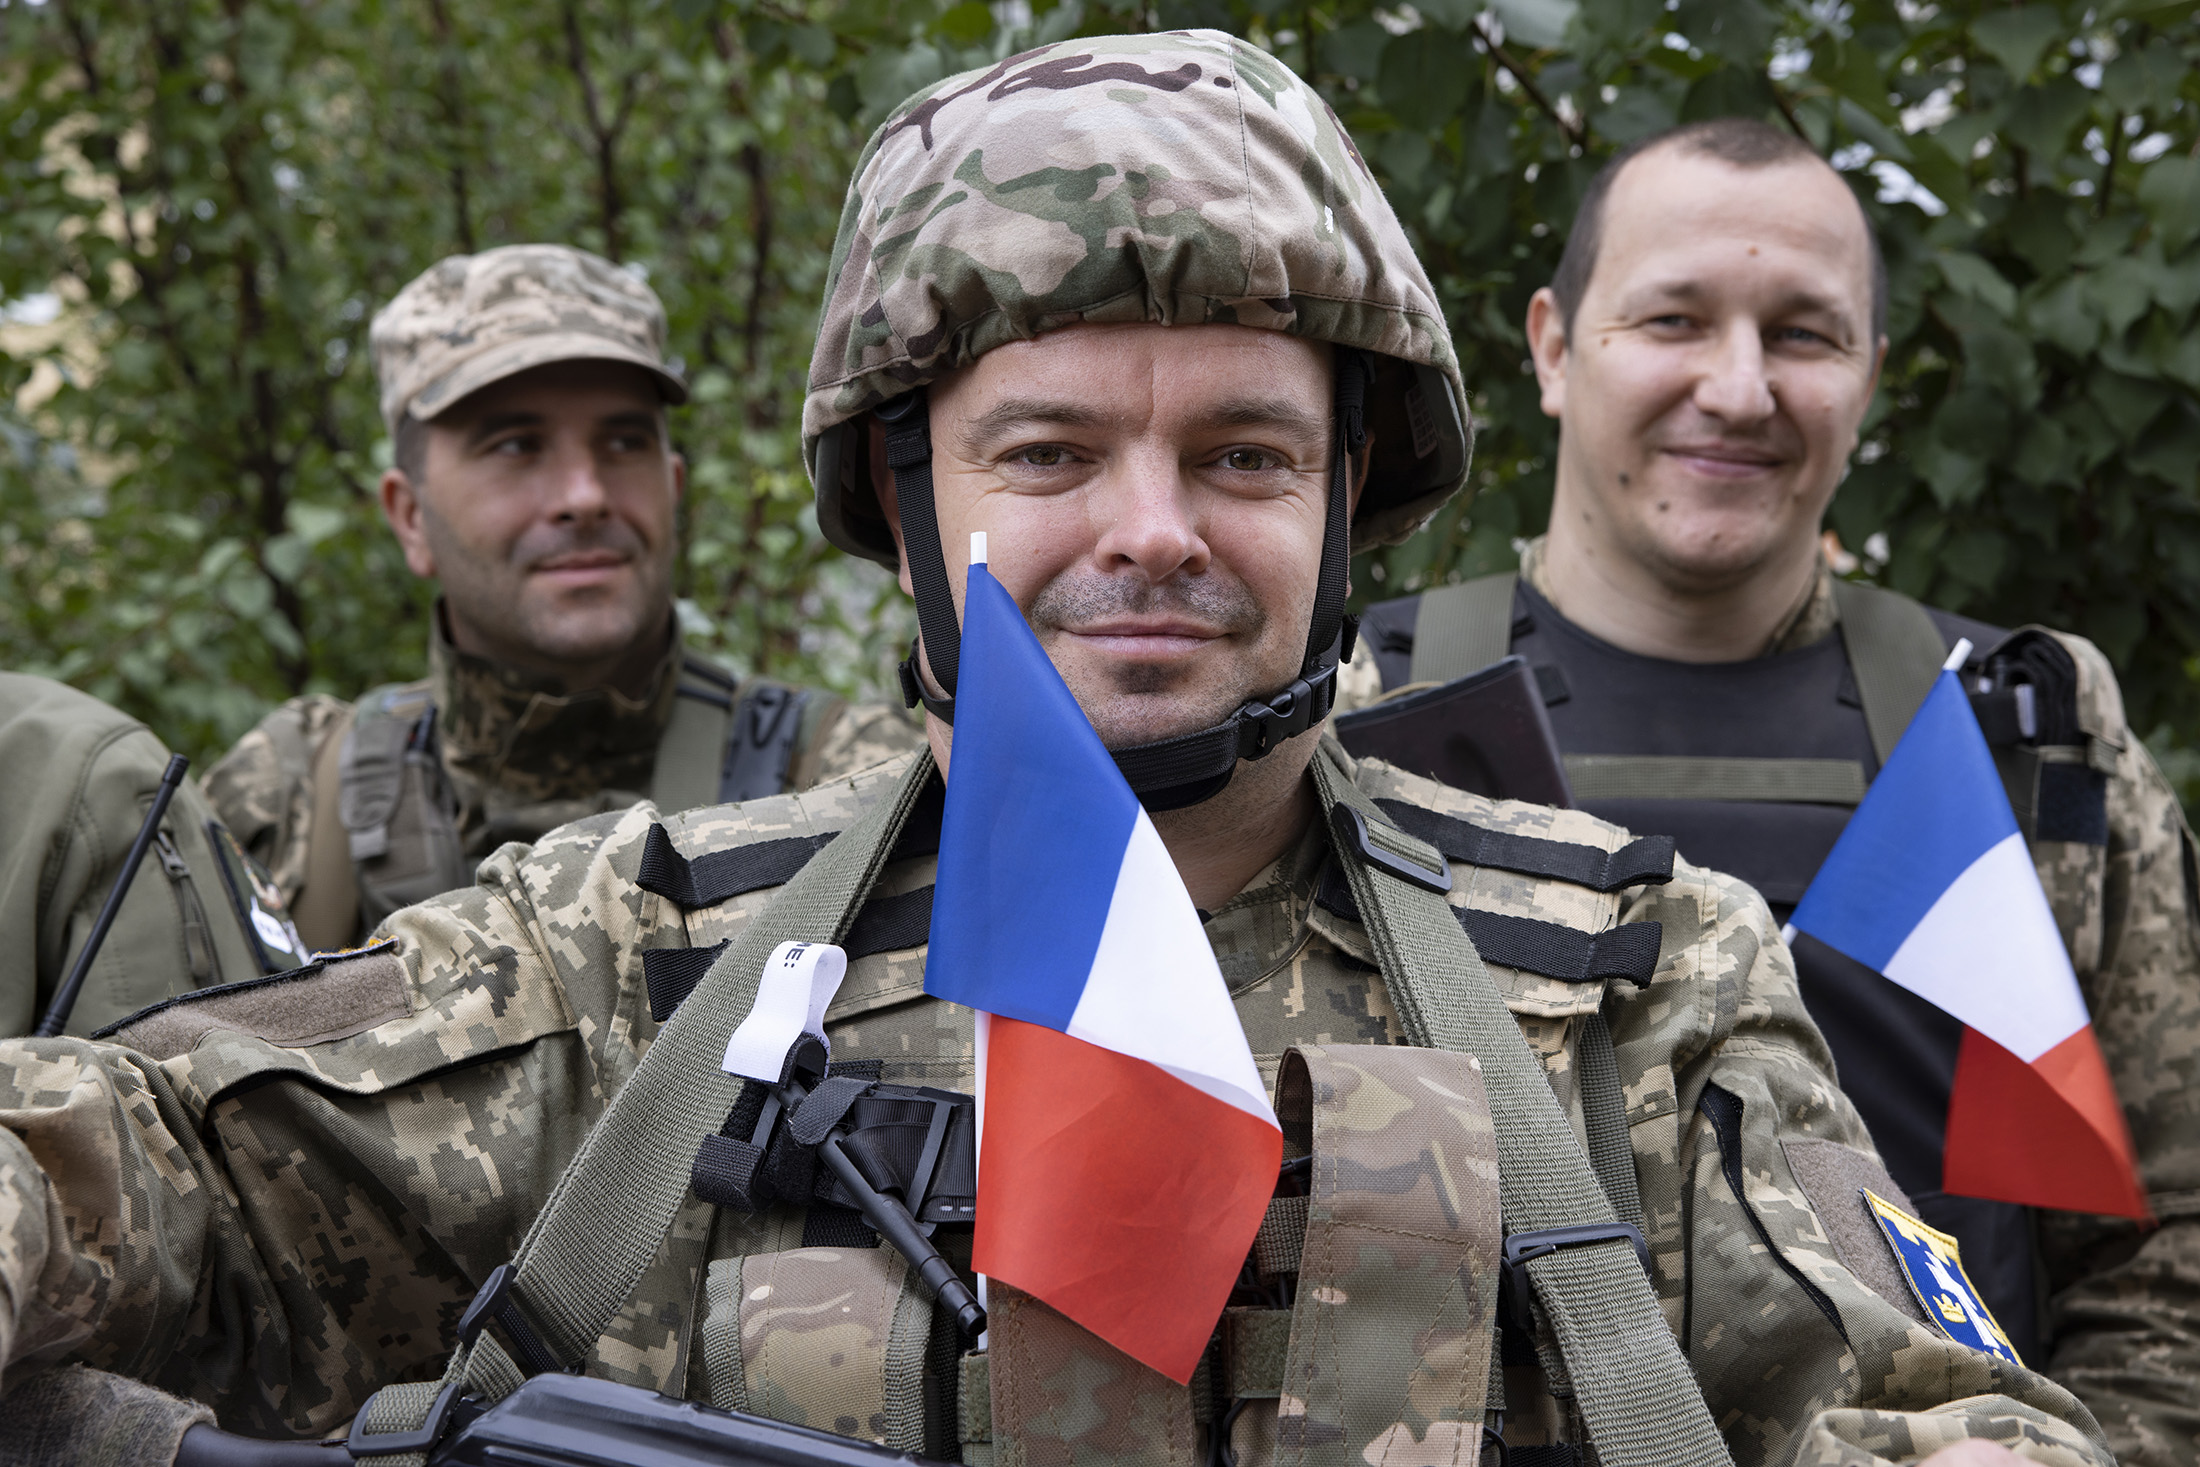 The Ukrainian Charles de Gaulle Battalion bears the colors of France, a strong symbol that salutes the spirit of the French Resistance.